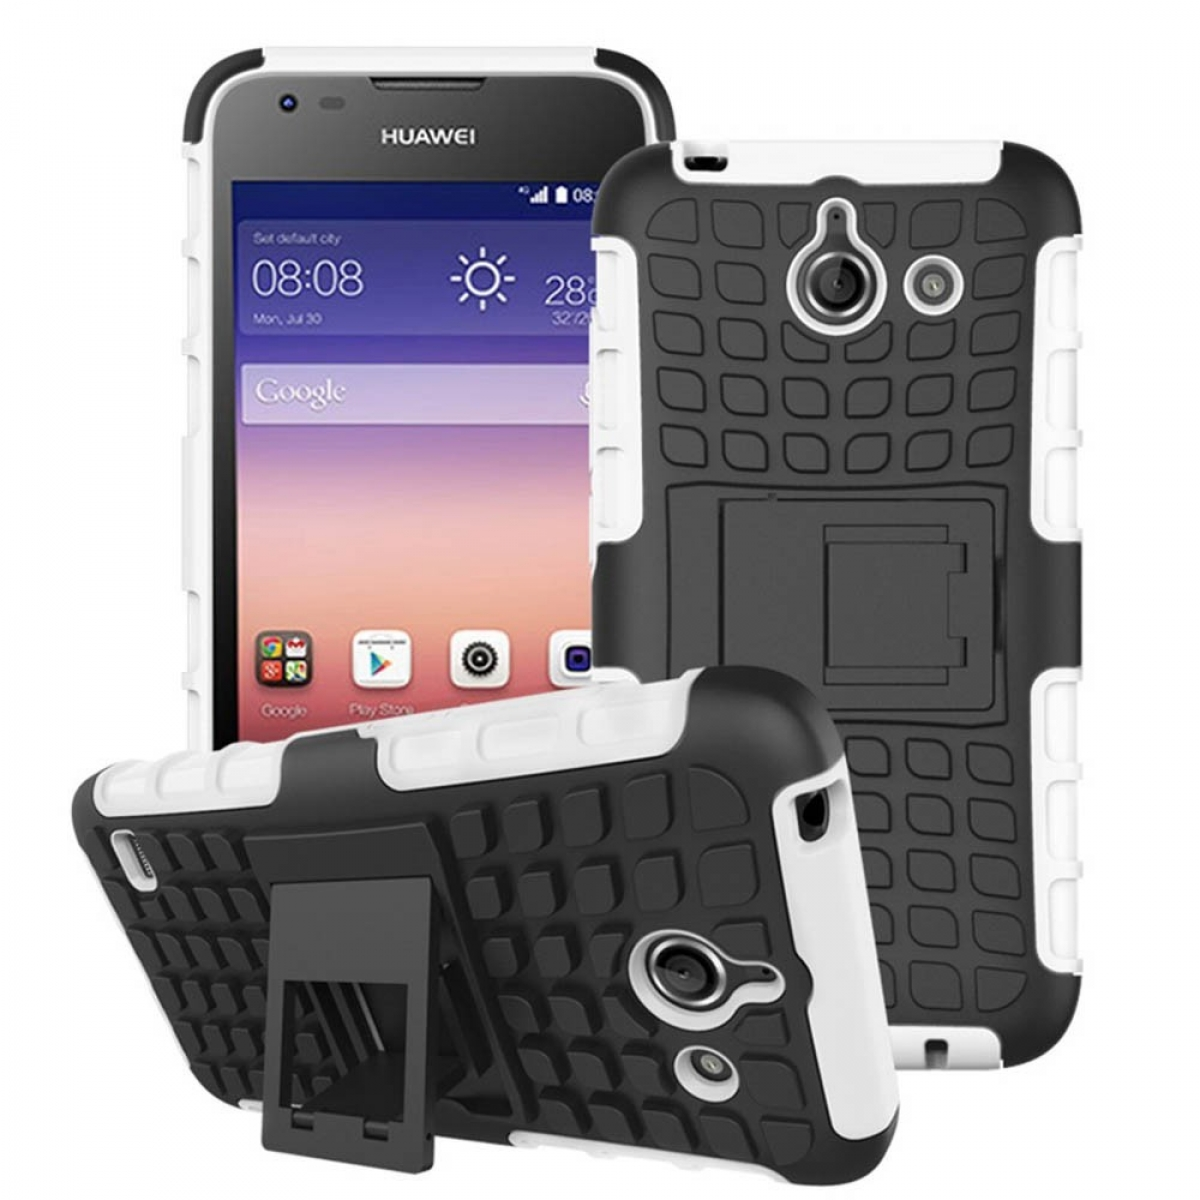 Backcover, Huawei, CASEONLINE 2i1, Y550, Weiß Ascend